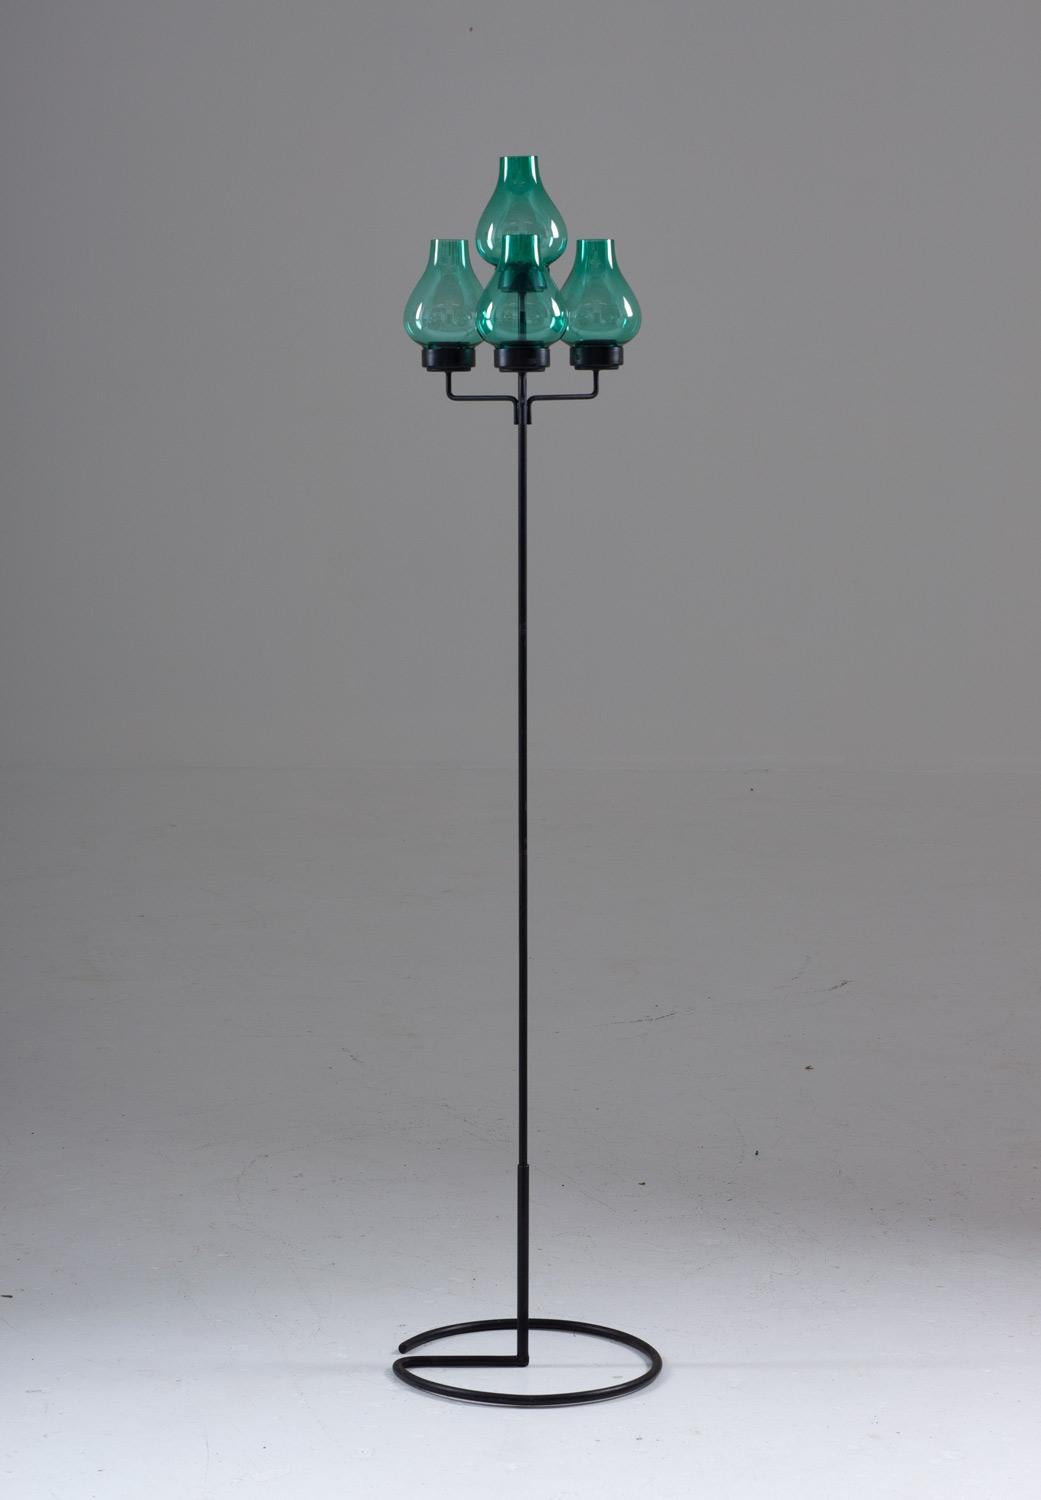 Rare floor standing candelabra in iron and glass by Gunnar Ander for Ystad Metall.
This candelabra consists of three connected iron sticks, supporting four green glass shades. The lower stick is made to be able to put in the ground for outdoor use.